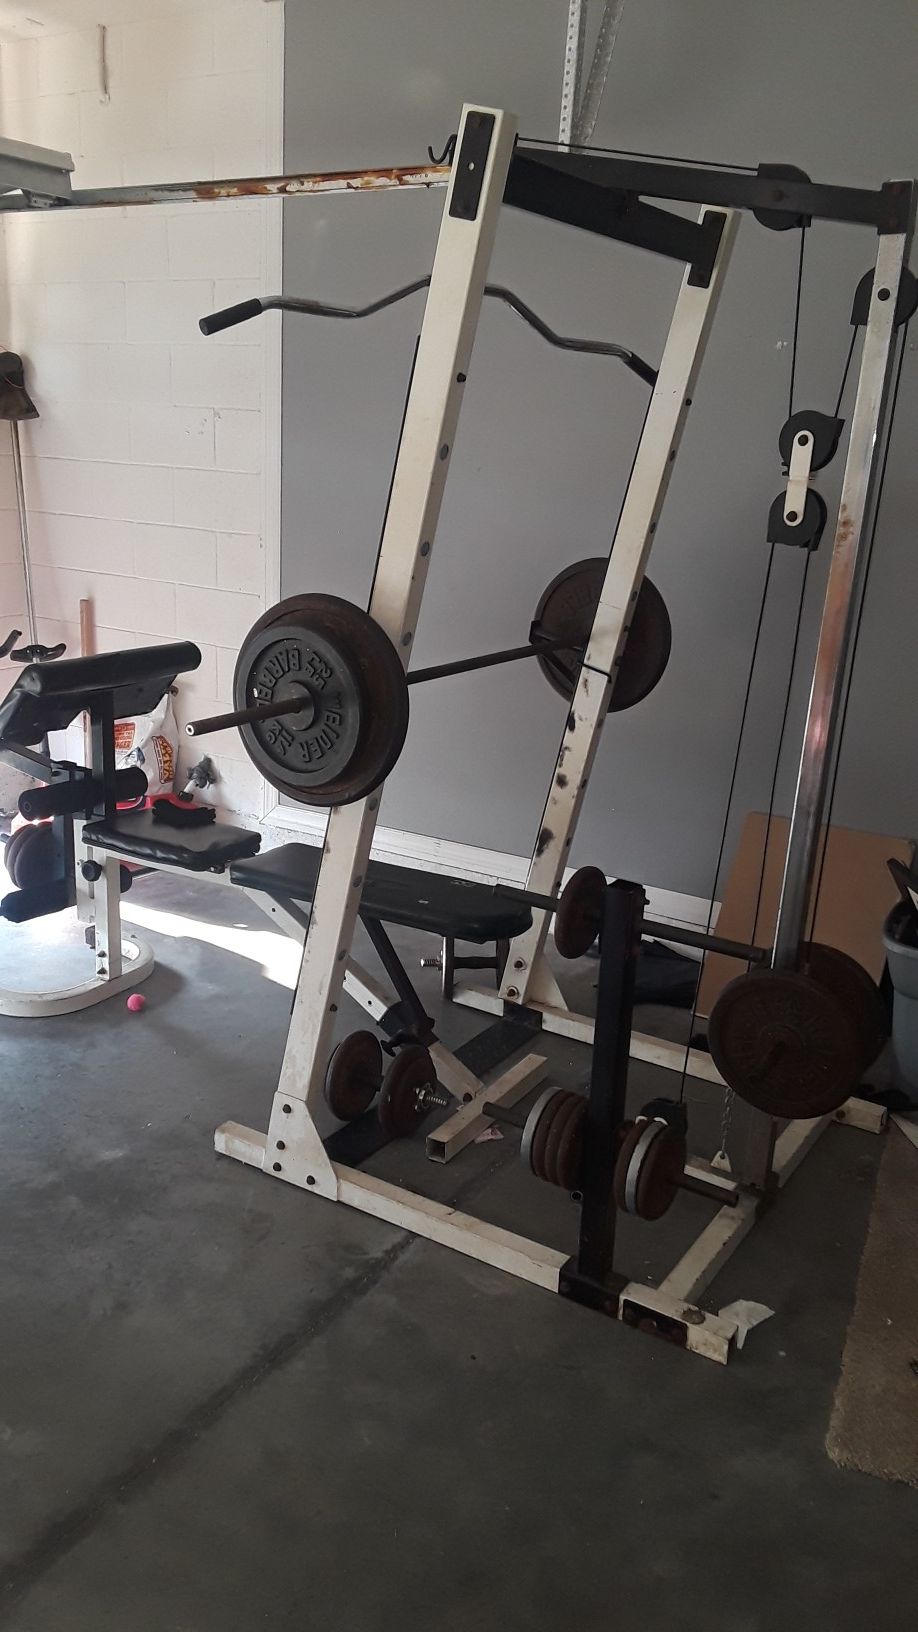 Total complete gym for free